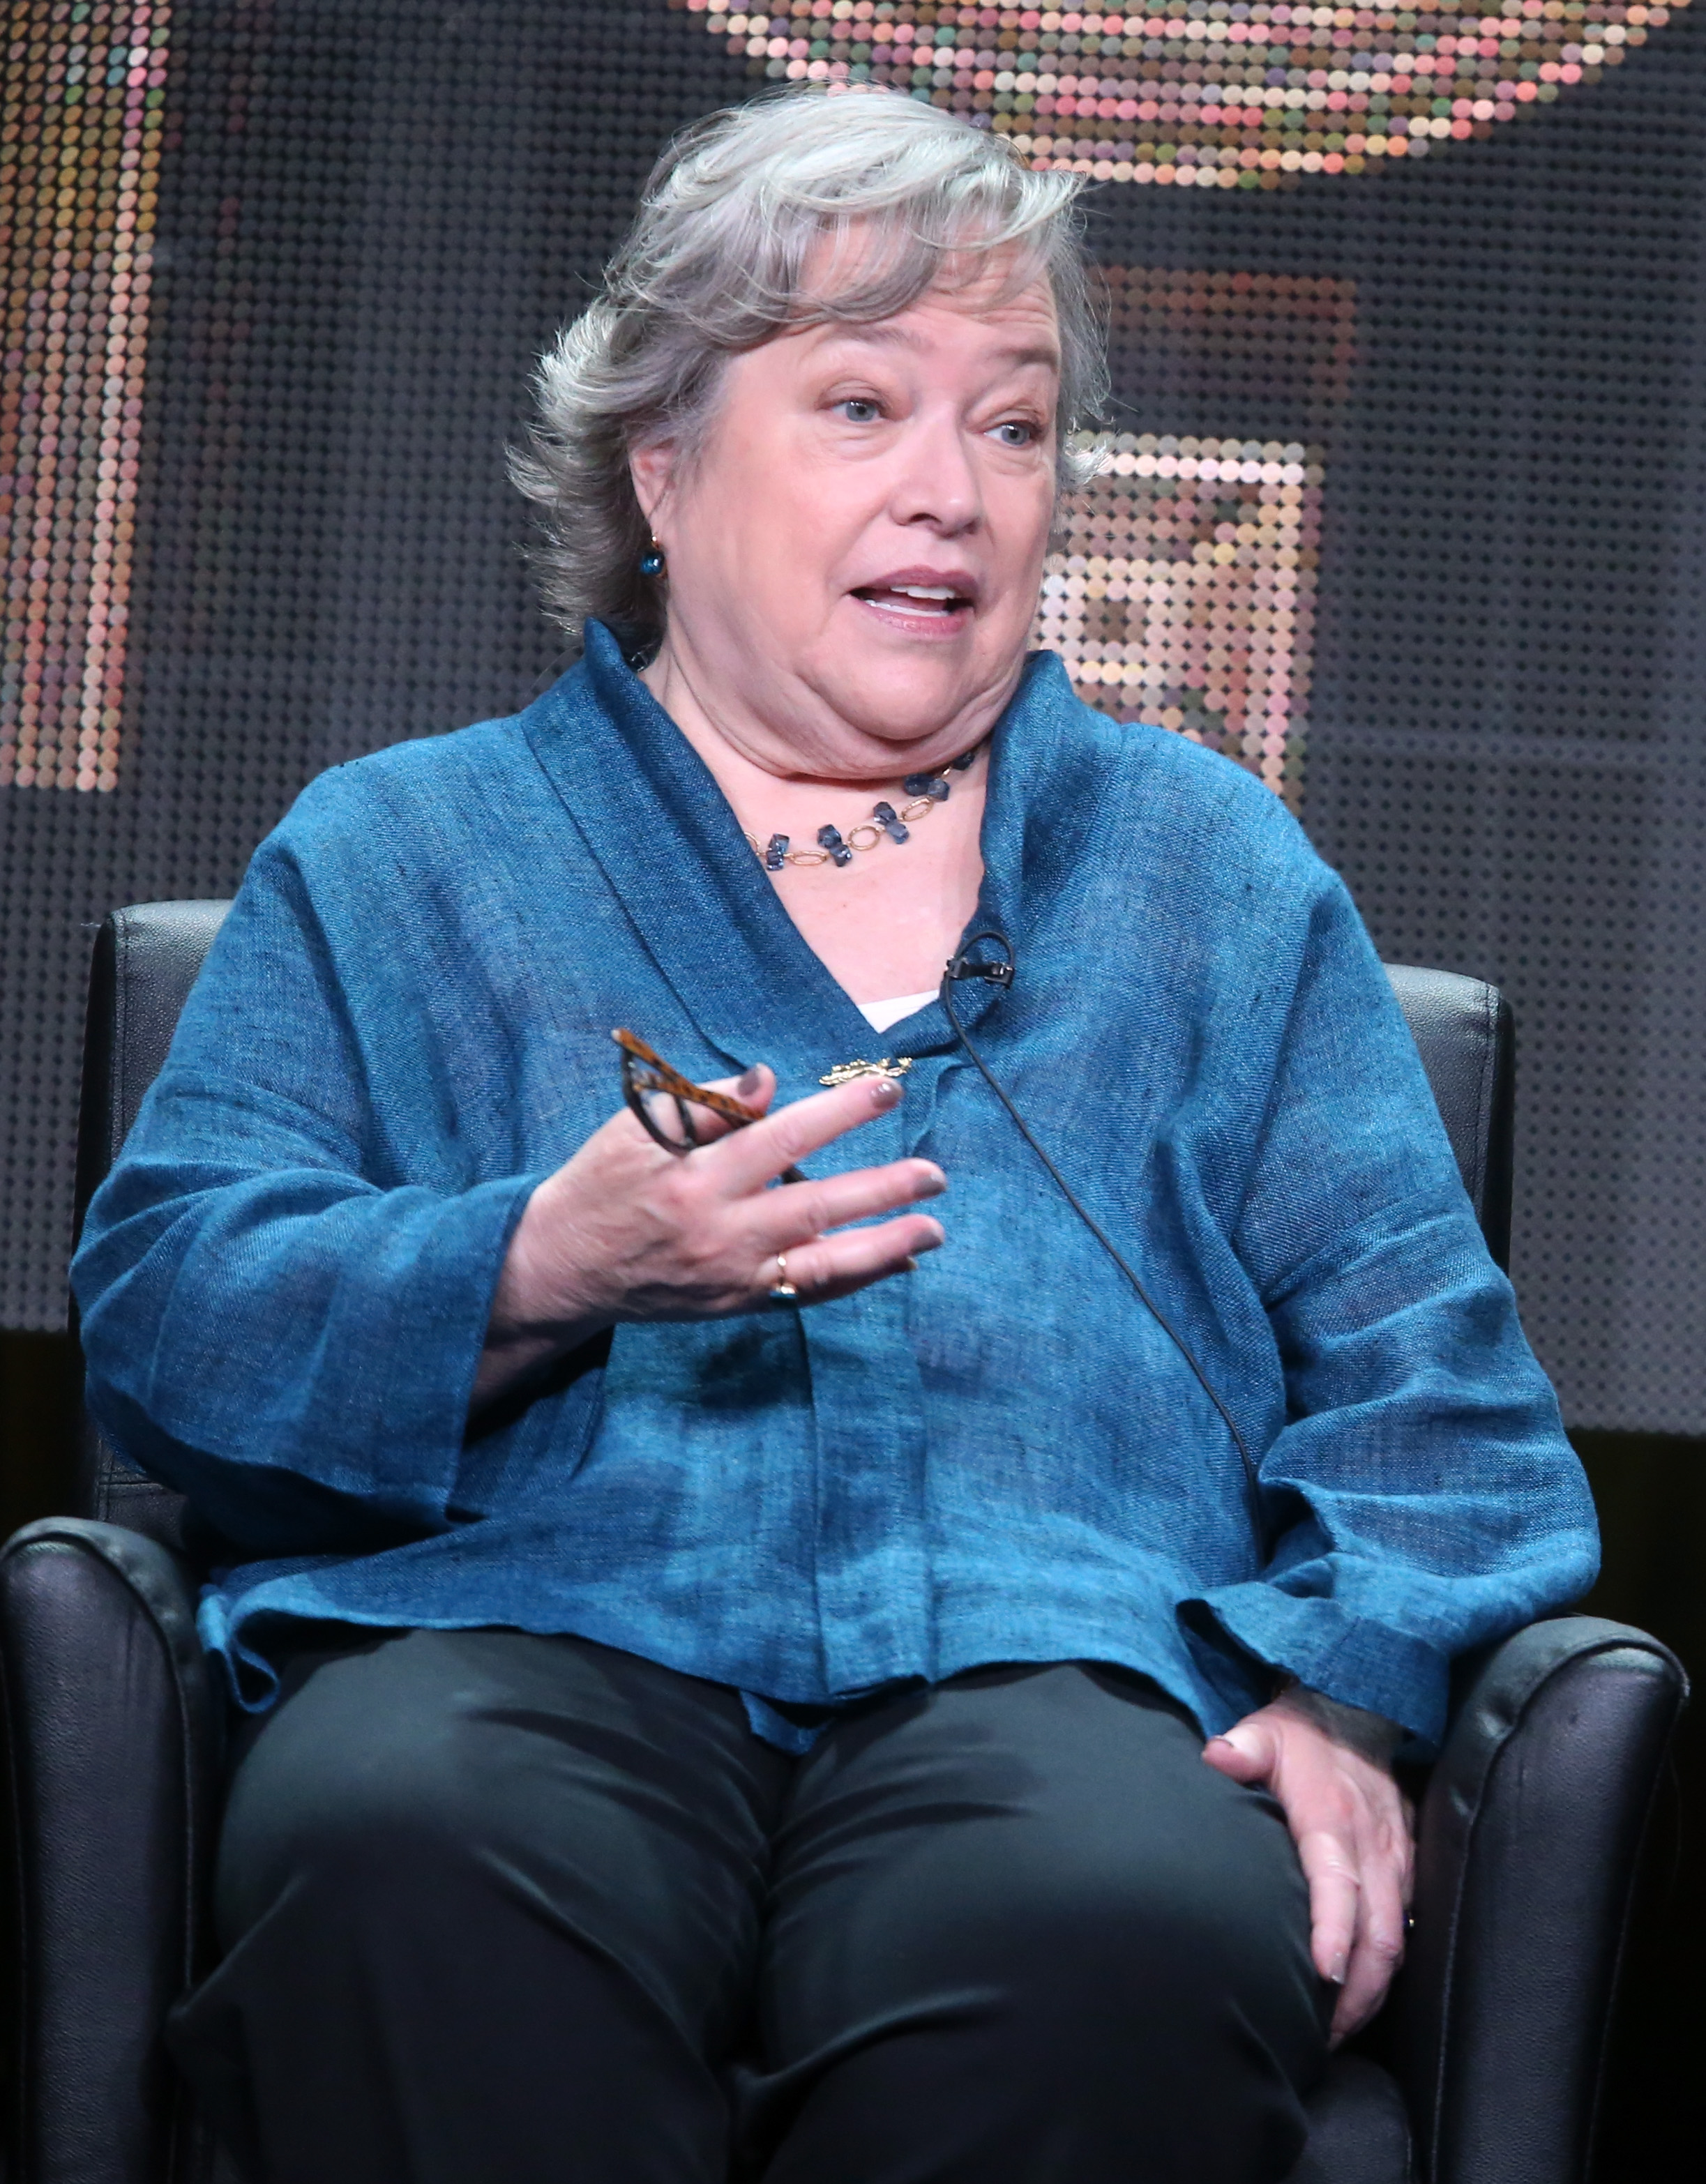 Actress Kathy Bates speaks onstage during the "AHS: Hotel" panel discussion at the FX portion of the 2015 Summer TCA Tour at The Beverly Hilton Hotel on August 7, 2015 in Beverly Hills, California | Source: Getty Images